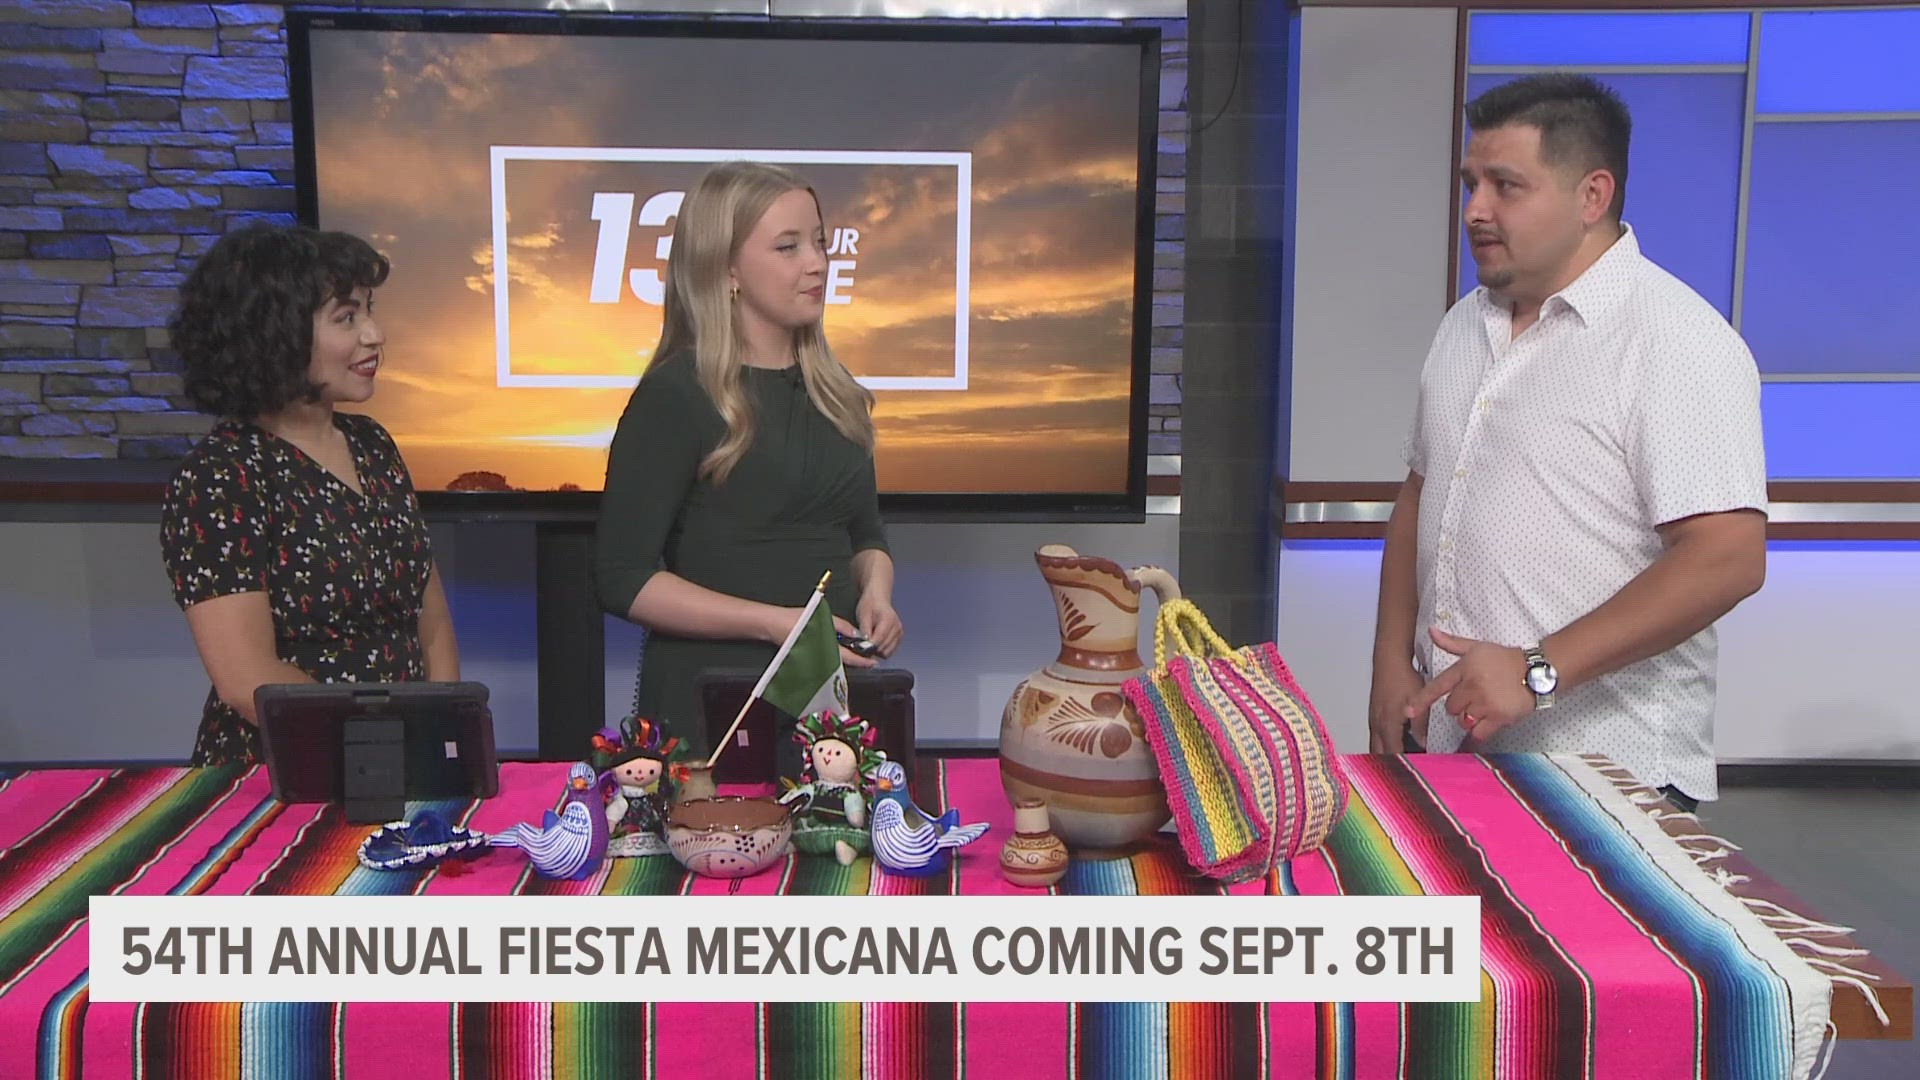 The 54th Annual Fiesta Mexicana gives you a chance to celebrate Mexican Independence right here in West Michigan.